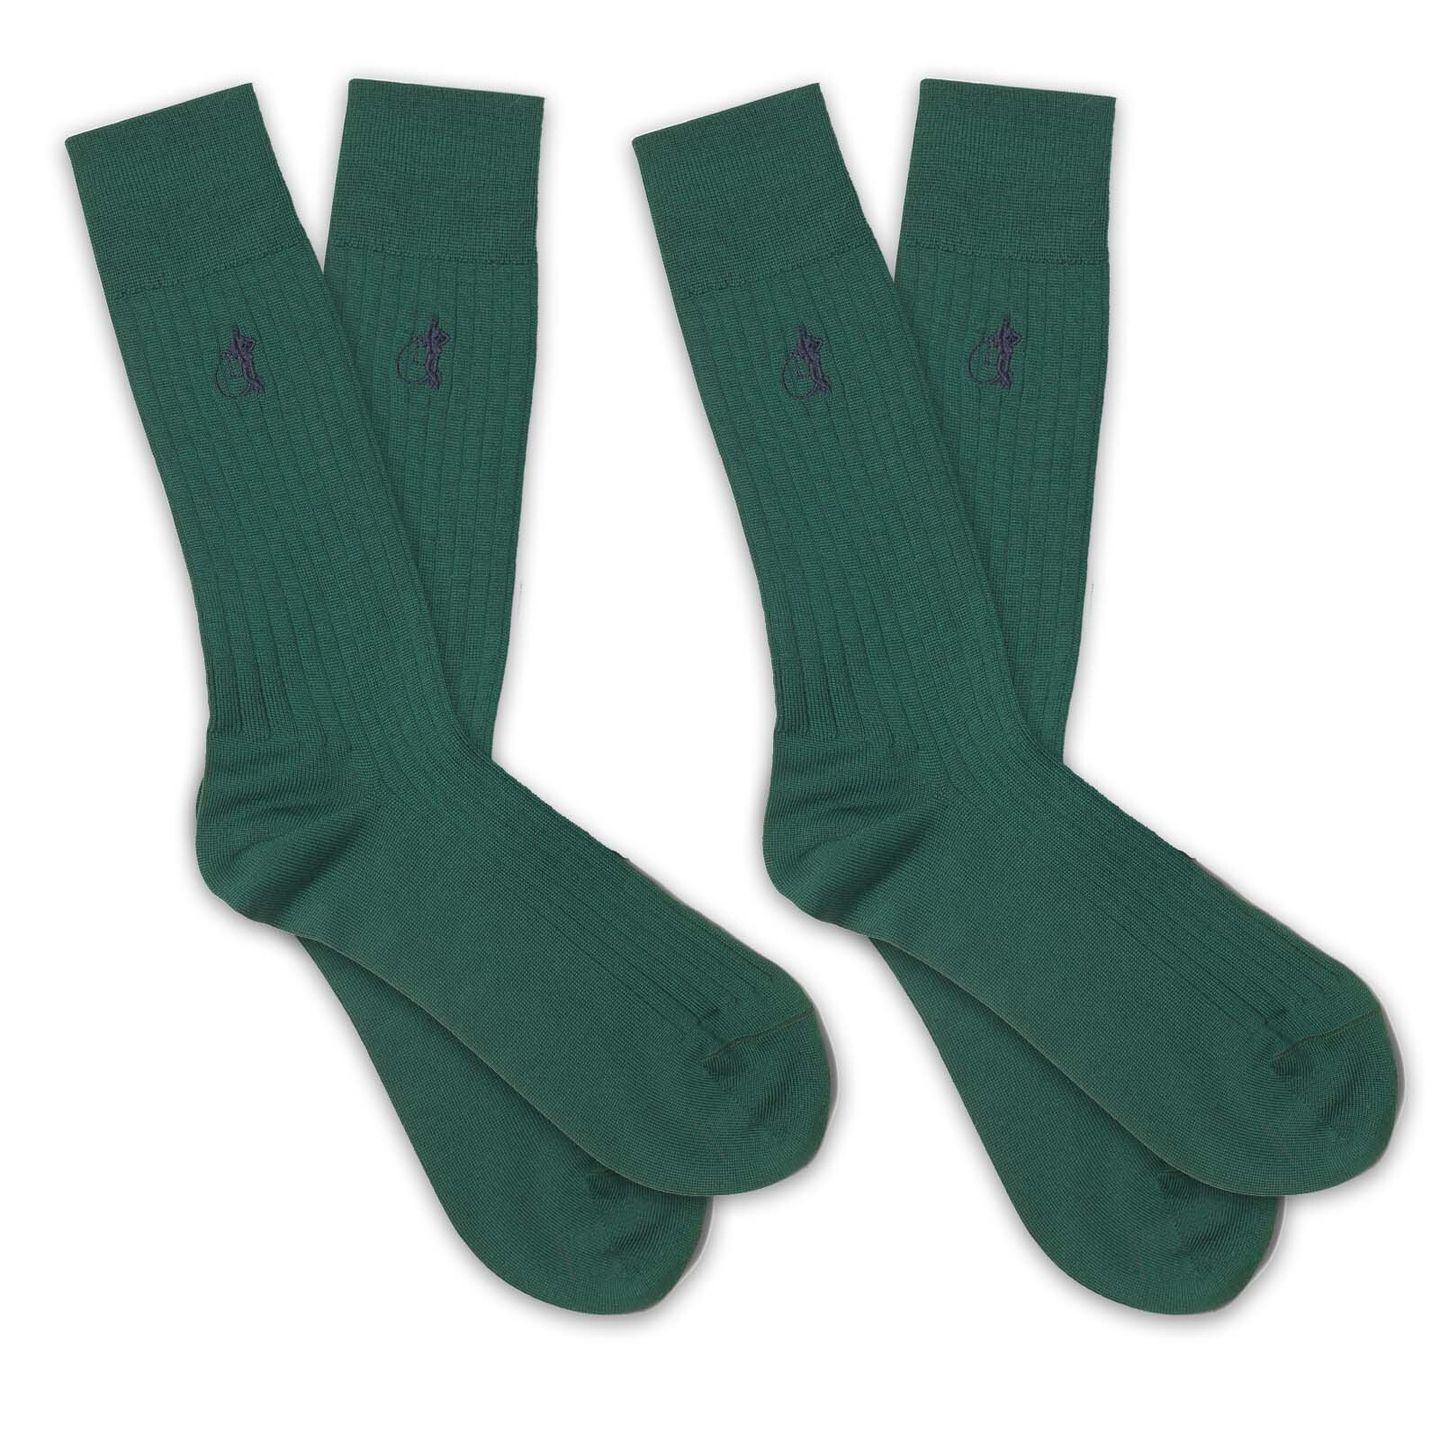 2 pairs of dark green socks with a white background